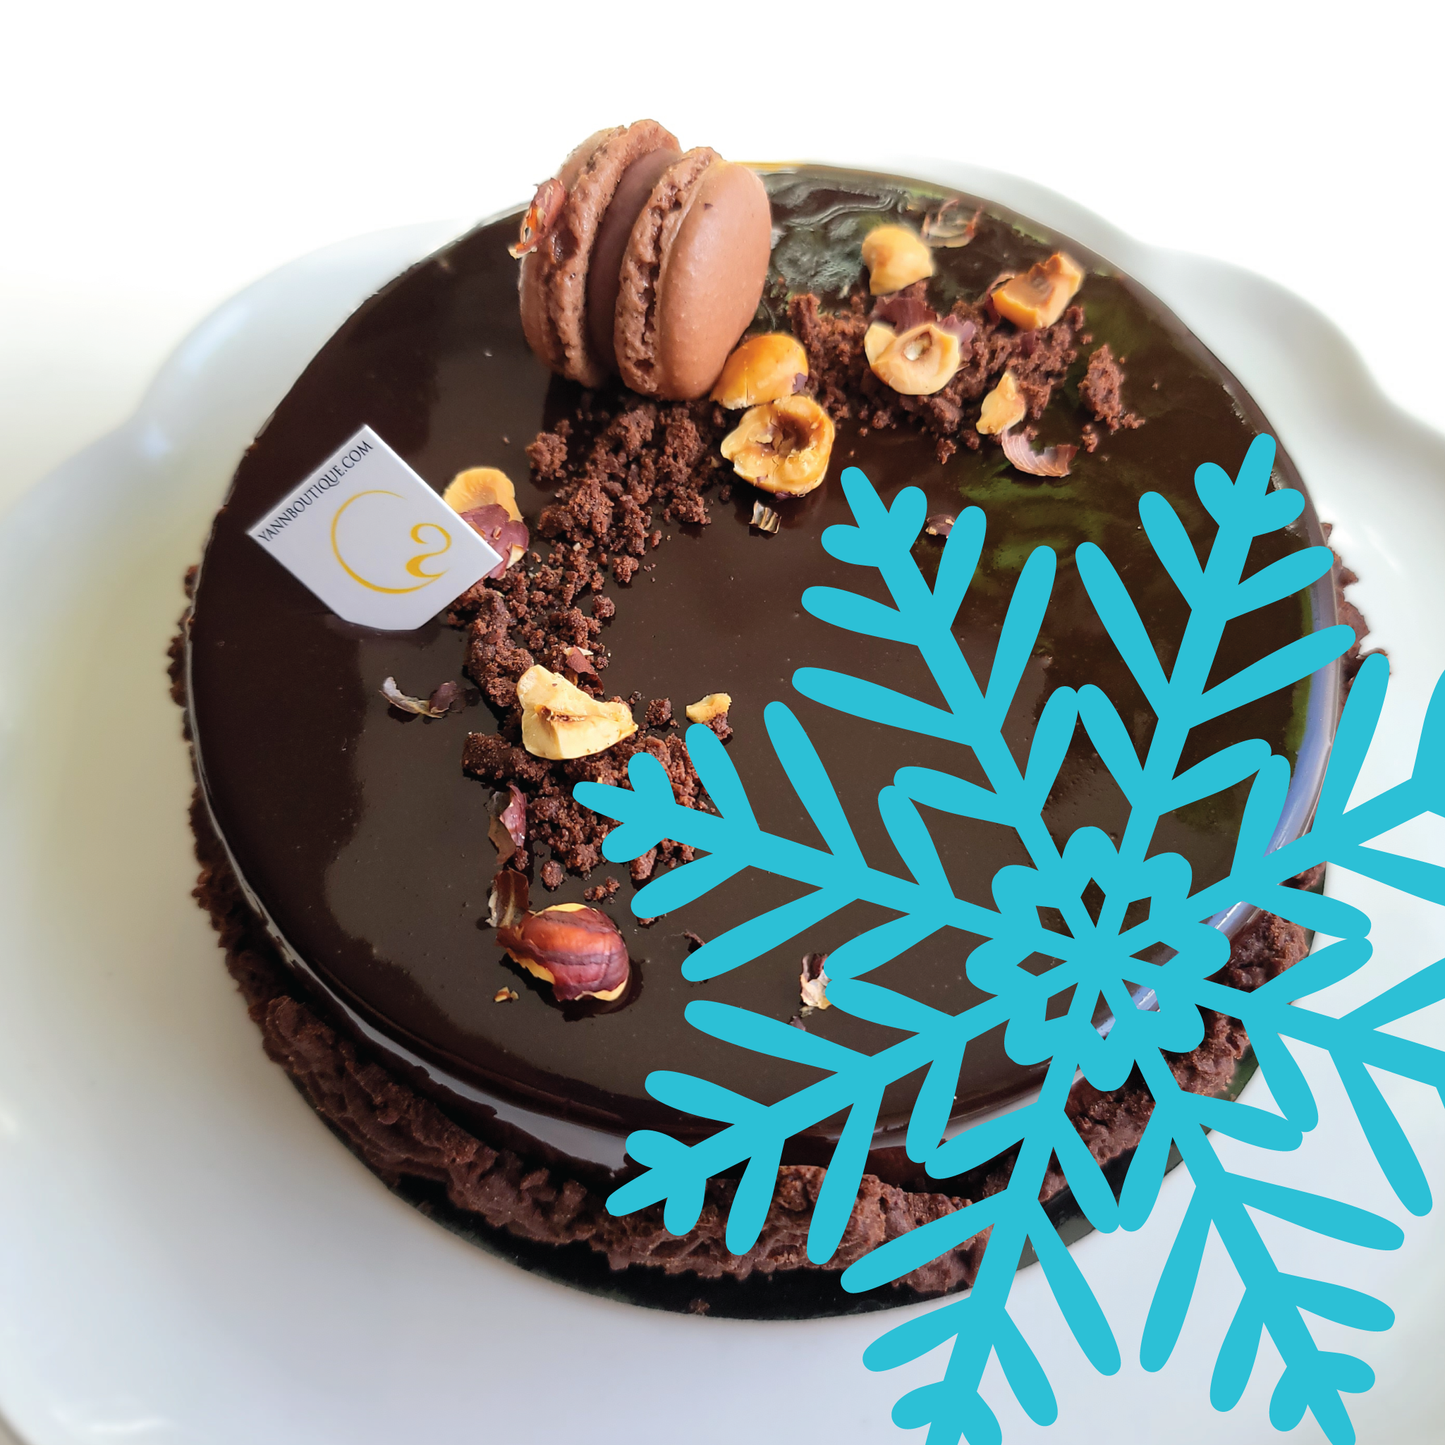 Yann Haute Patisserie for the best desserts & cakes in Calgary. Macarons, croissants, bread and chocolate! Authentic French pastry shop & bakery.